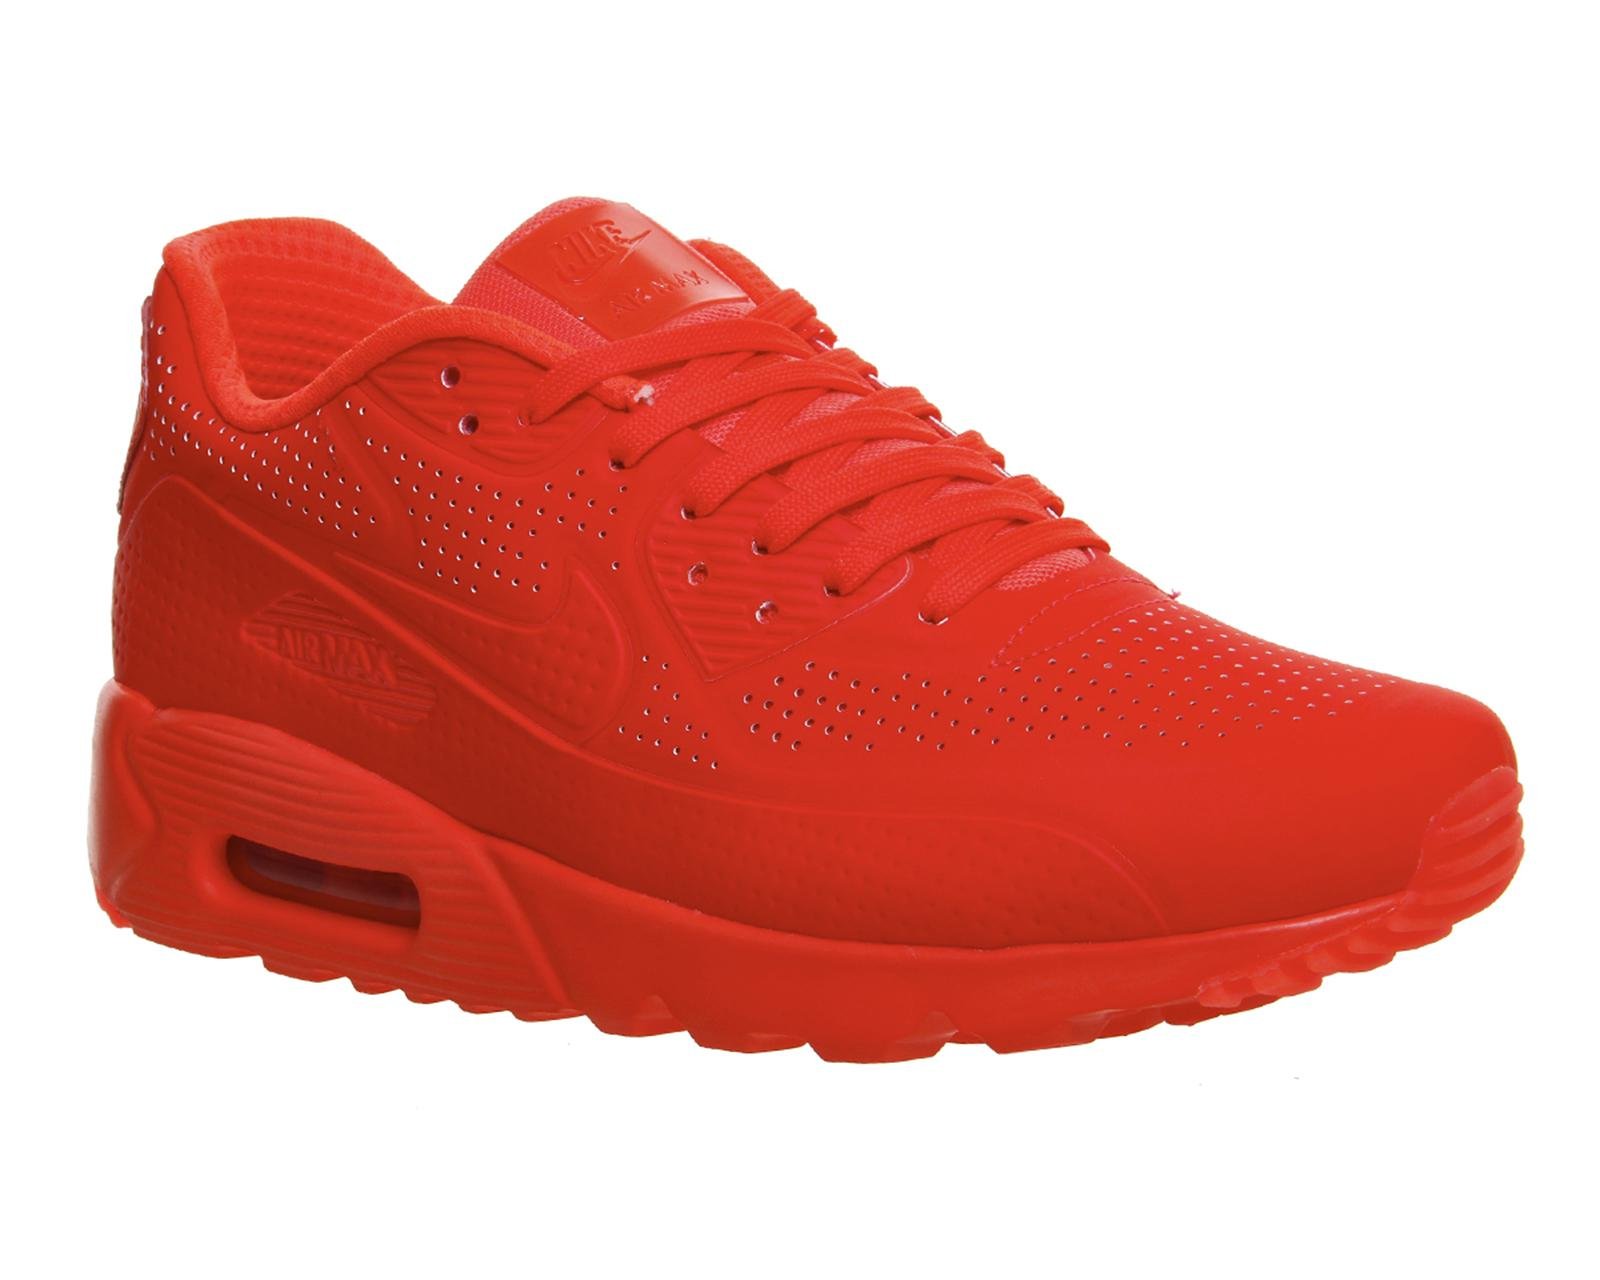 Nike Synthetic Air Max 90 Ultra Moire in Red for Men - Lyst